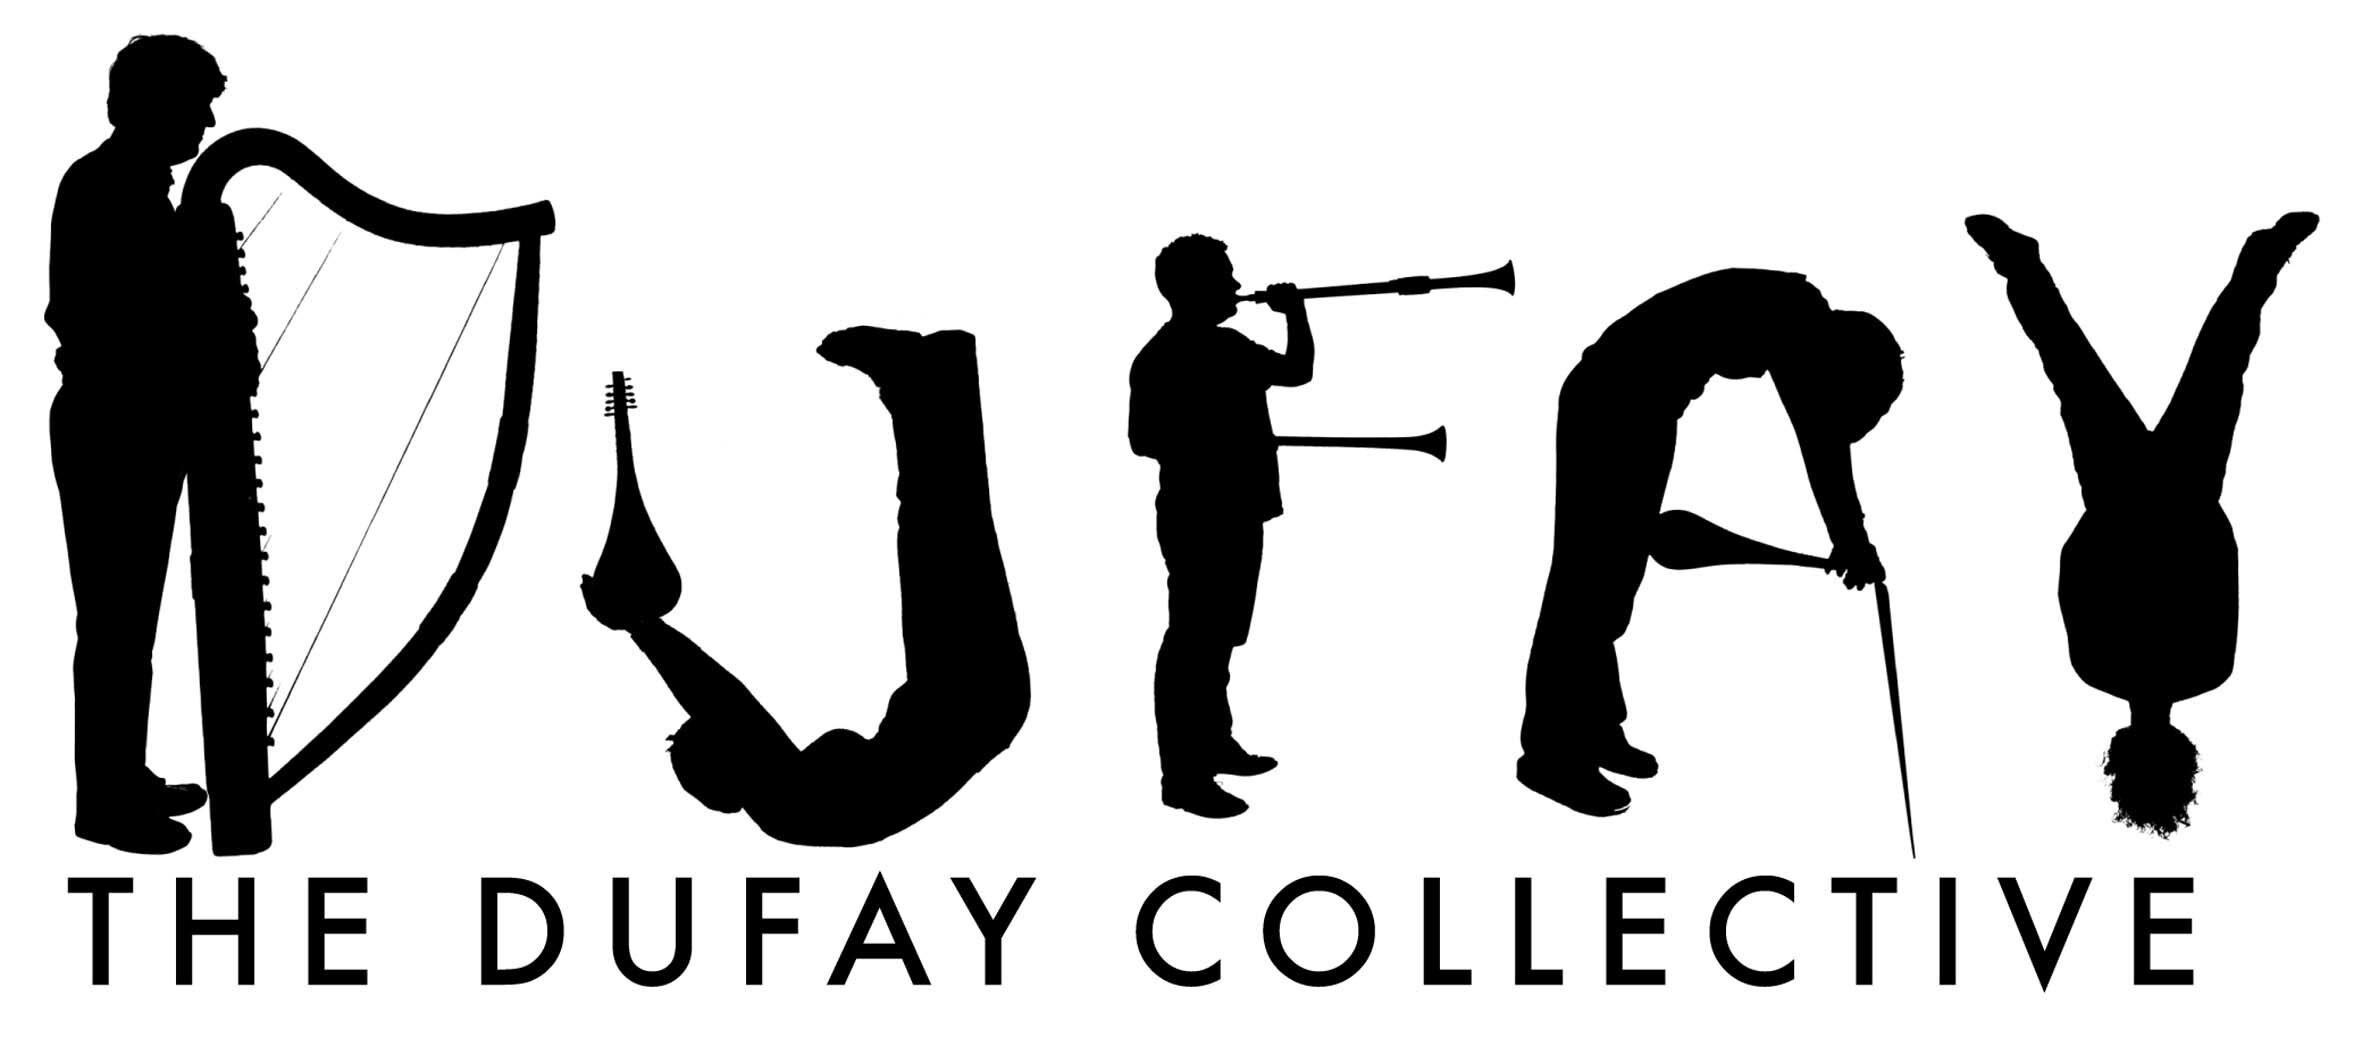 THE DUFAY COLLECTIVE Profile